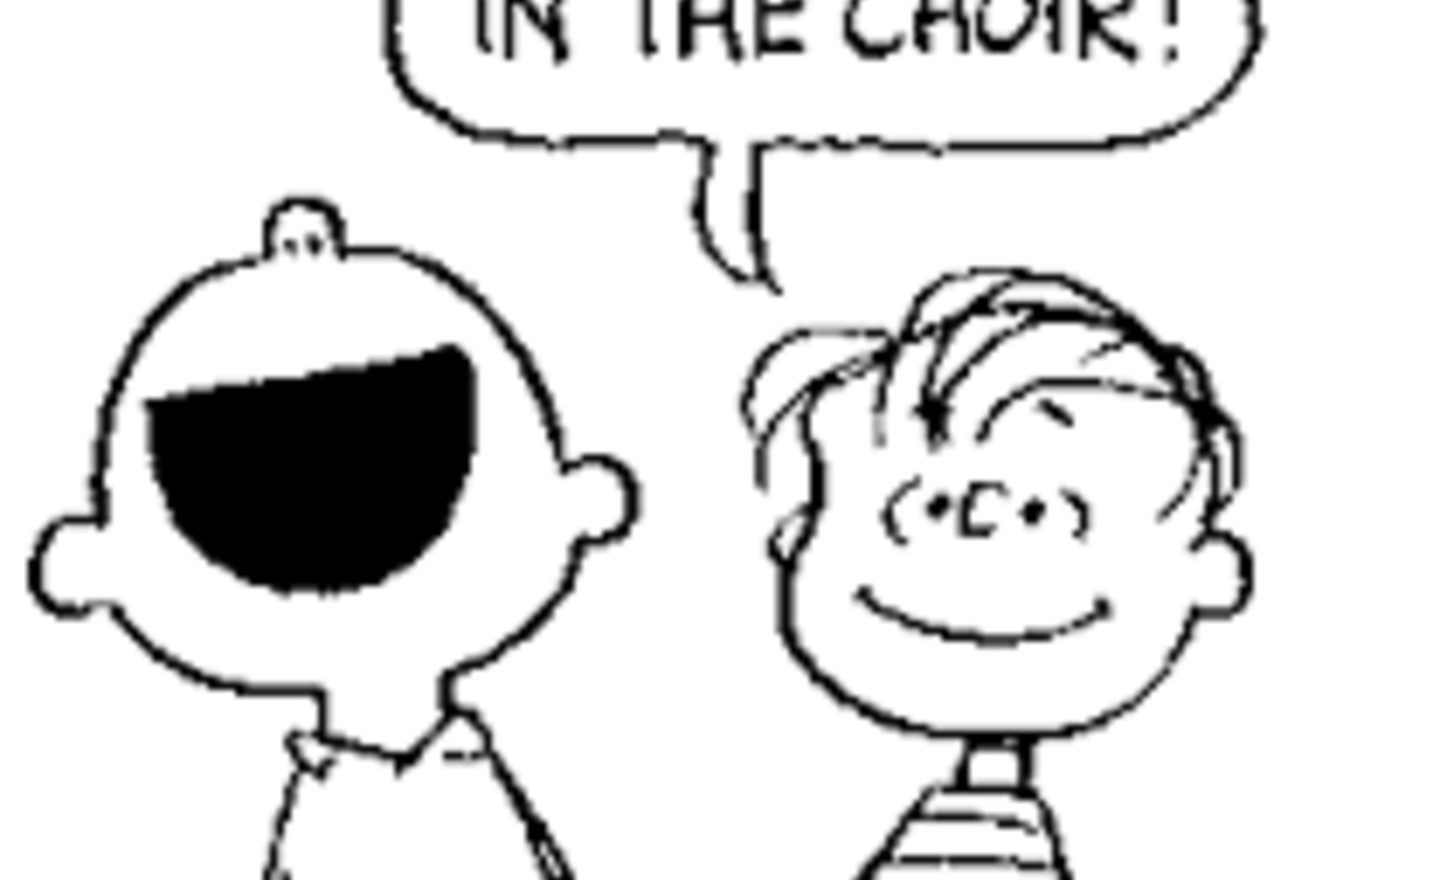 Image of Happiness is LISTENING to the Choir